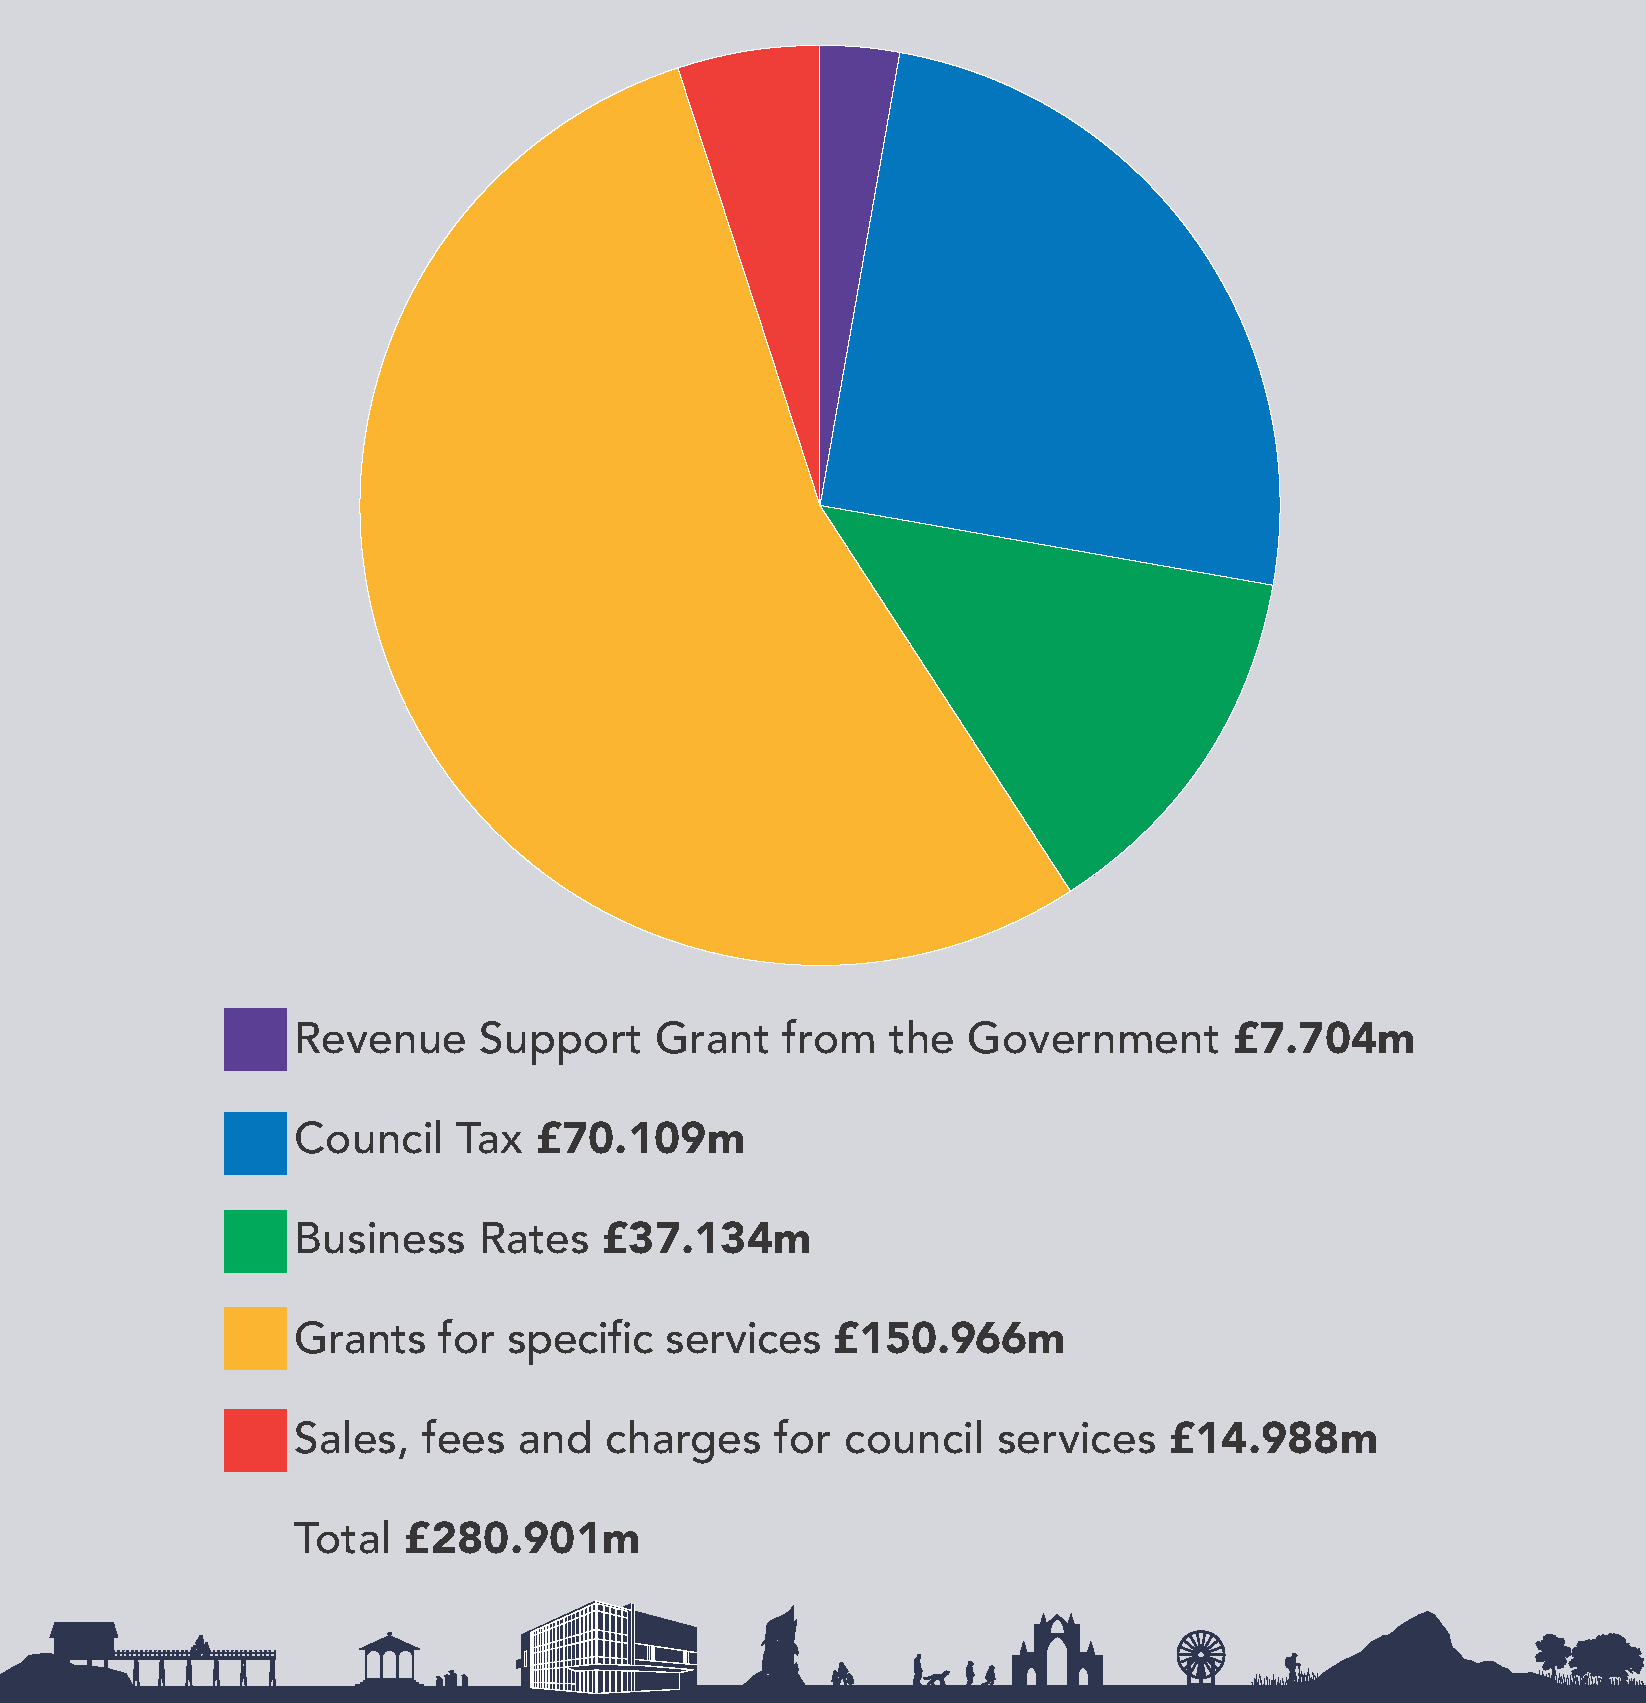 Image of a pie chart outlining where RCBC gets its funding. This is broken down as: revenue supoport grant £7.704m, council tax £70.109m, business rates, £37.134m, grants for specific services £150.966m, sales, fees and charges for services £14.988m. total £280.901m